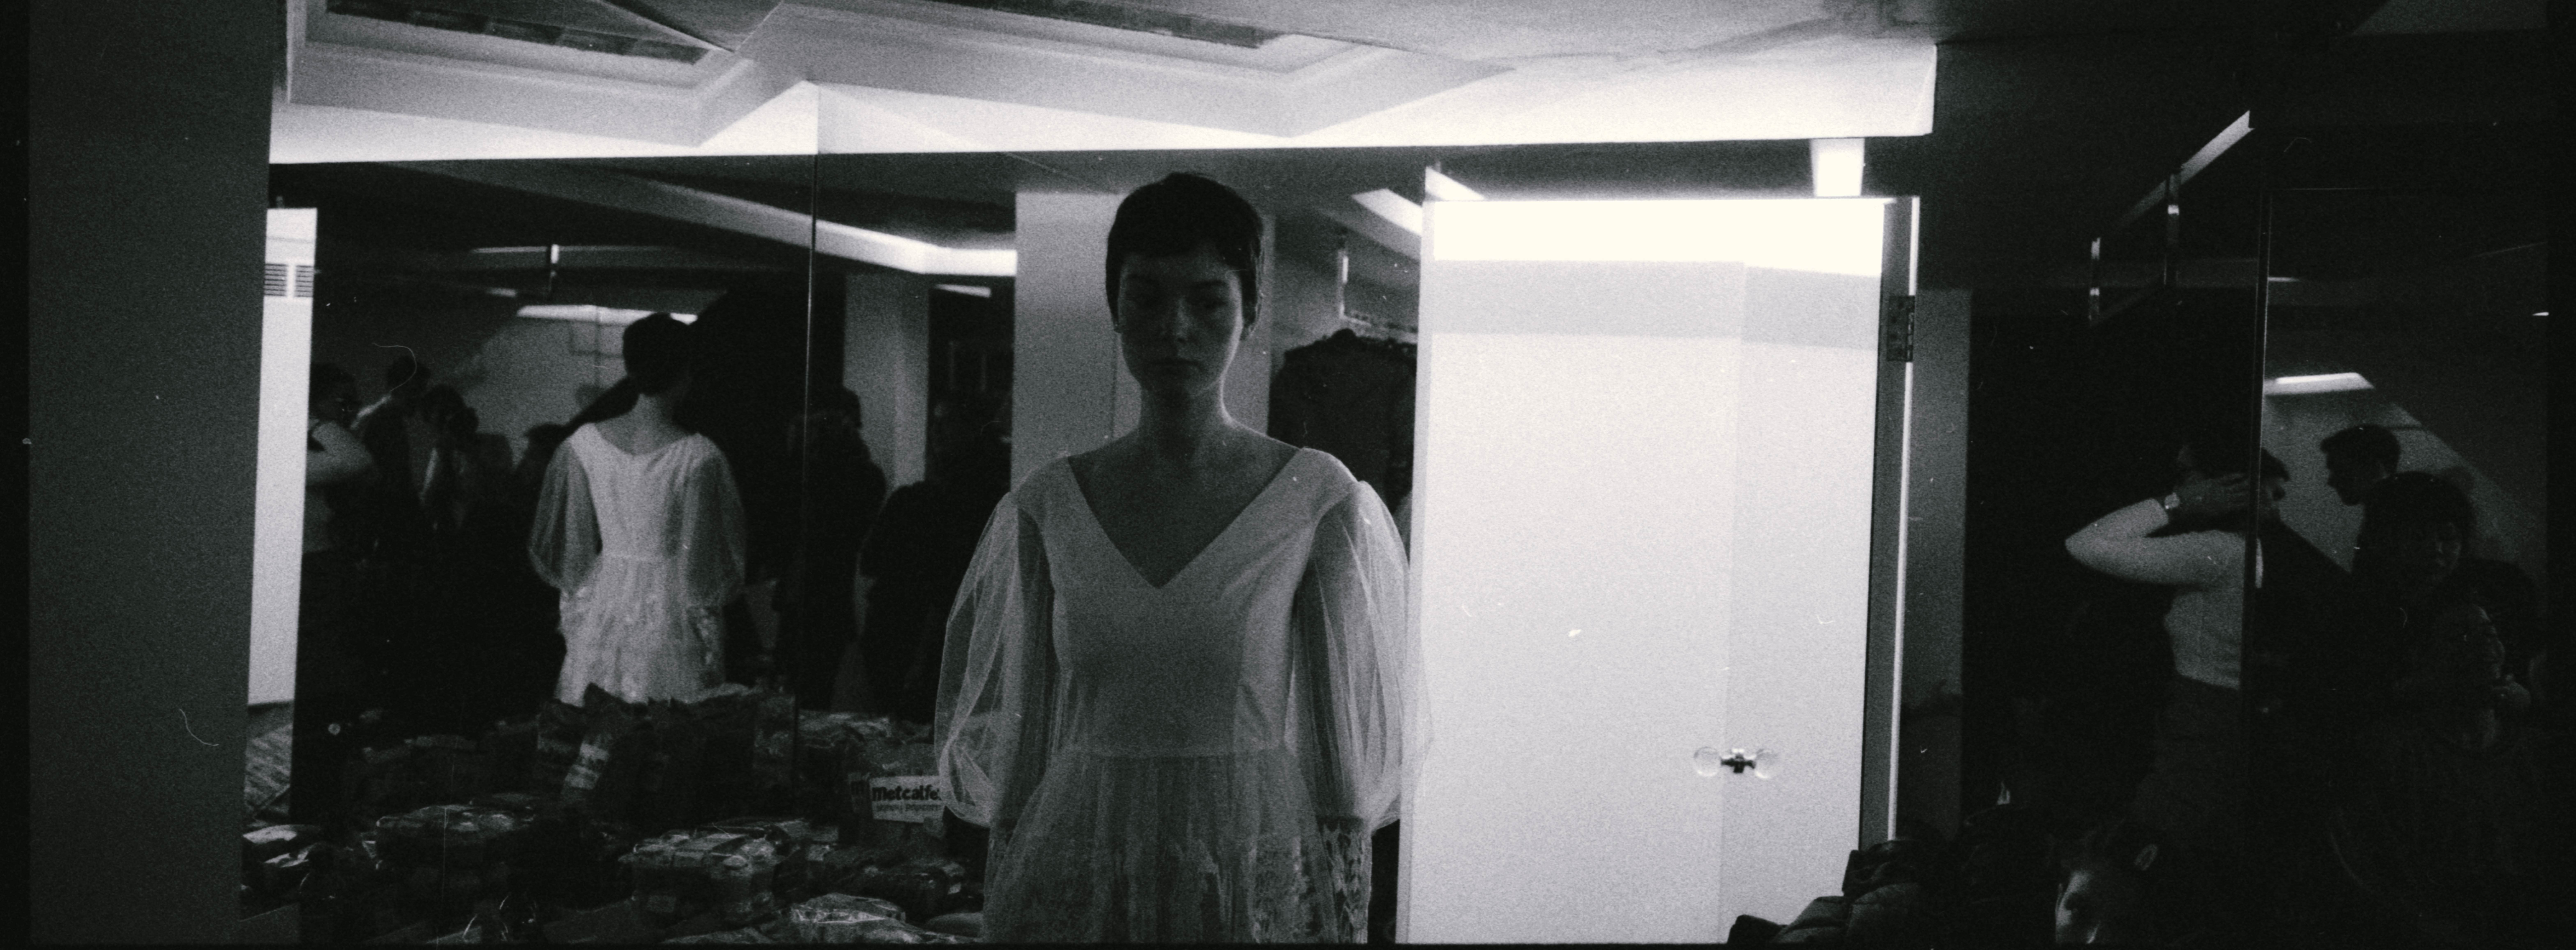 Backstage image from London Fashion week shot by Simon King on black and white ilford DELTA 3200 film